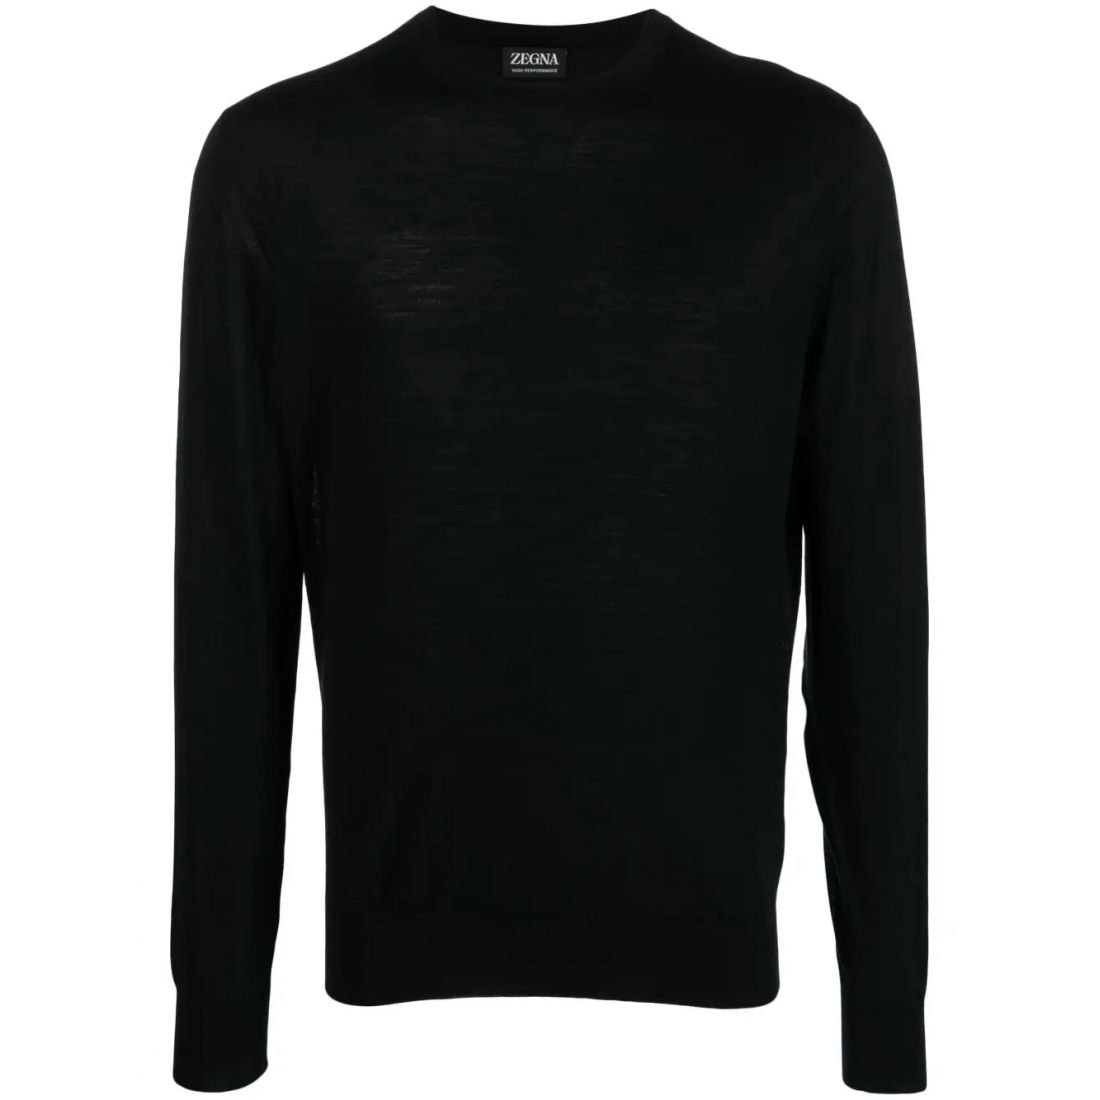 Zegna - Pull pour Hommes